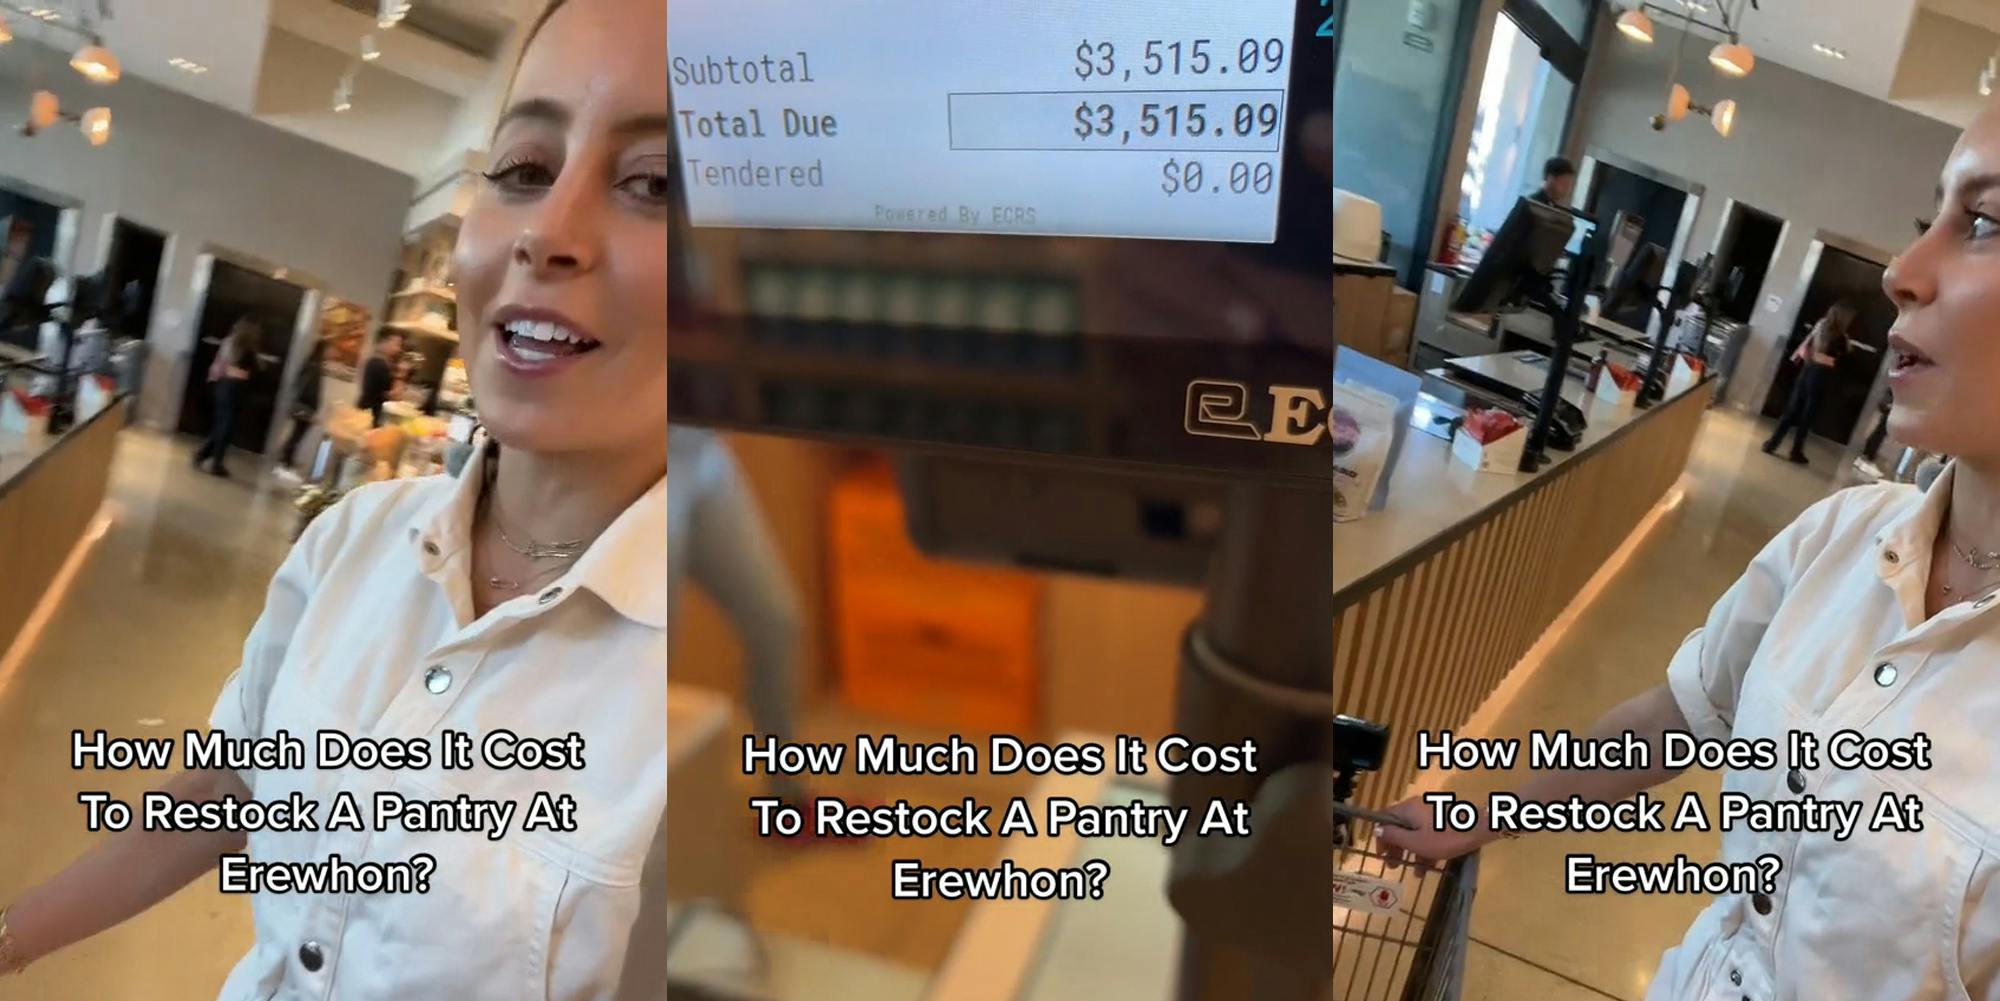 chef in Erewhon grocery store speaking caption "How Much Does It Cost To Restock A Pantry At Erewhon?" (l) Erewhon checkout with total on screen at "$3,515.09" caption "How Much Does It Cost To Restock A Pantry At Erewhon" (c) chef in Erewhon grocery store speaking caption "How Much Does It Cost To Restock A Pantry At Erewhon?" (r)